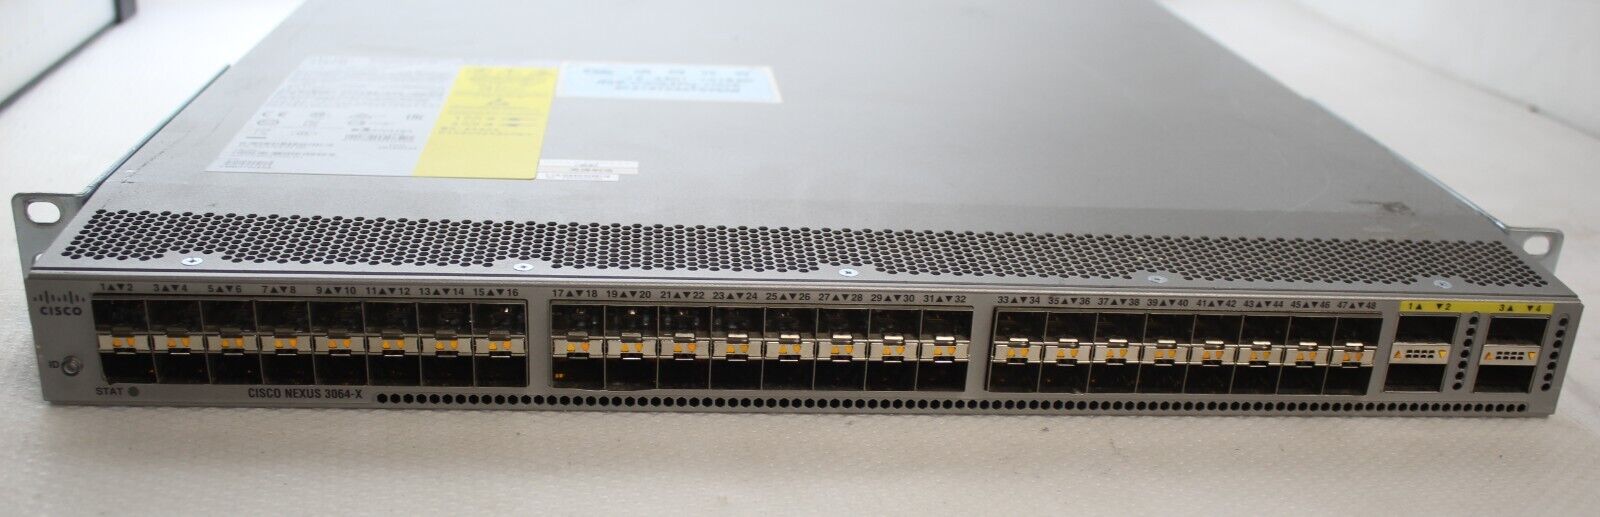 Cisco Nexus N3K-C3064PQ-10GX 68-4363-03 48x 10G SFP+ 4x40G QSFP+ Switch tested